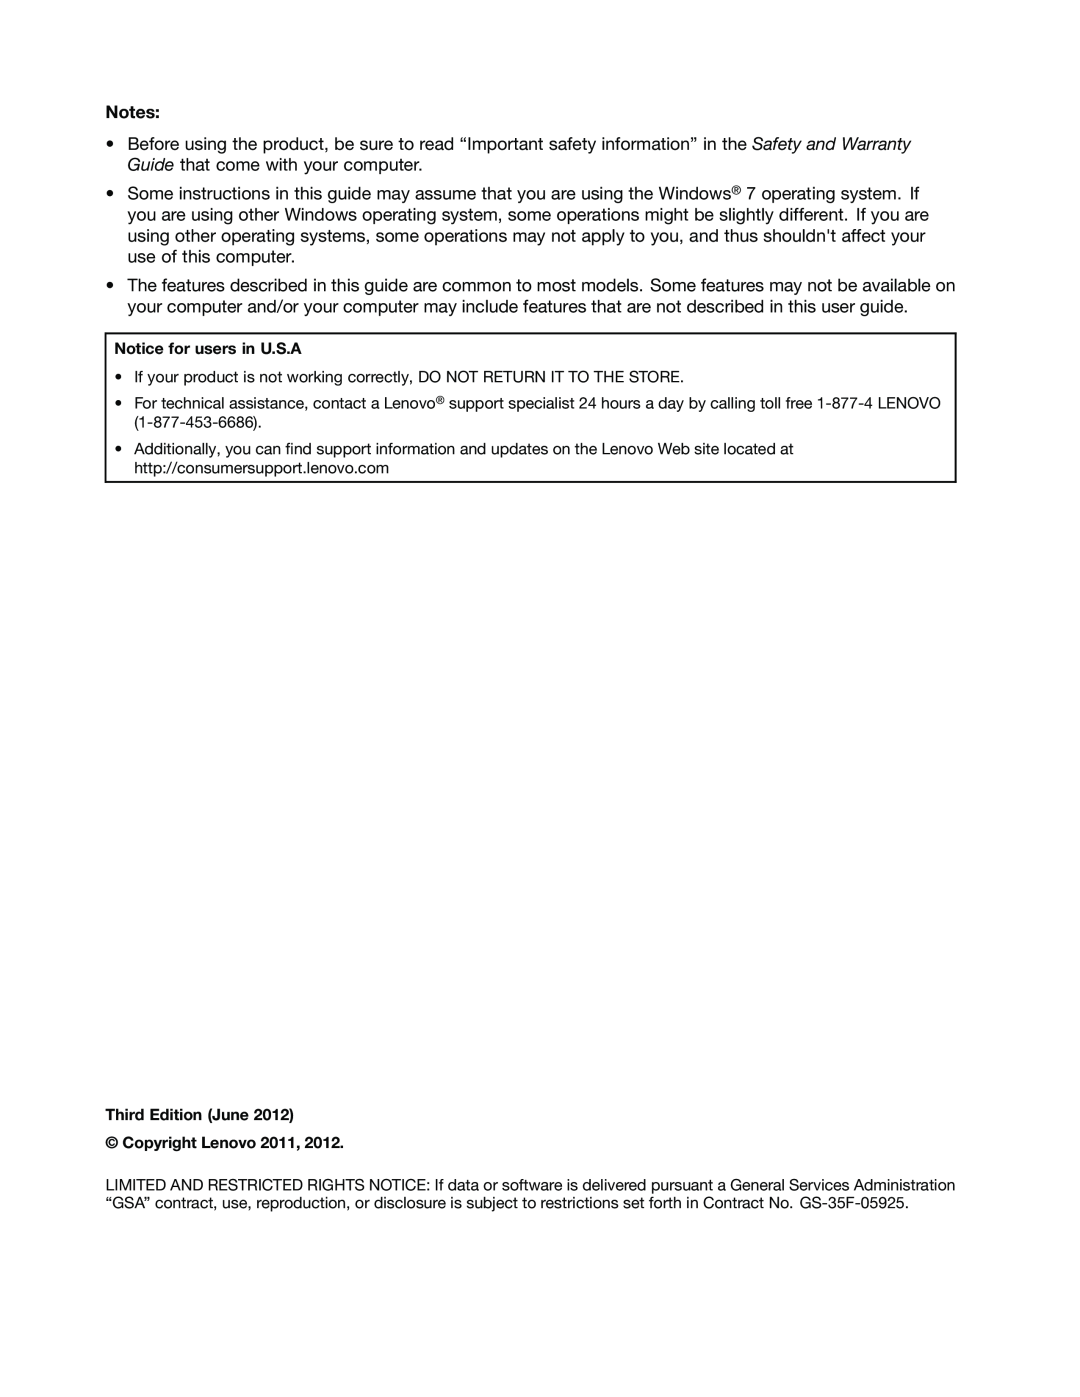 Lenovo B470E manual Notice for users in U.S.A, Third Edition June Copyright Lenovo 